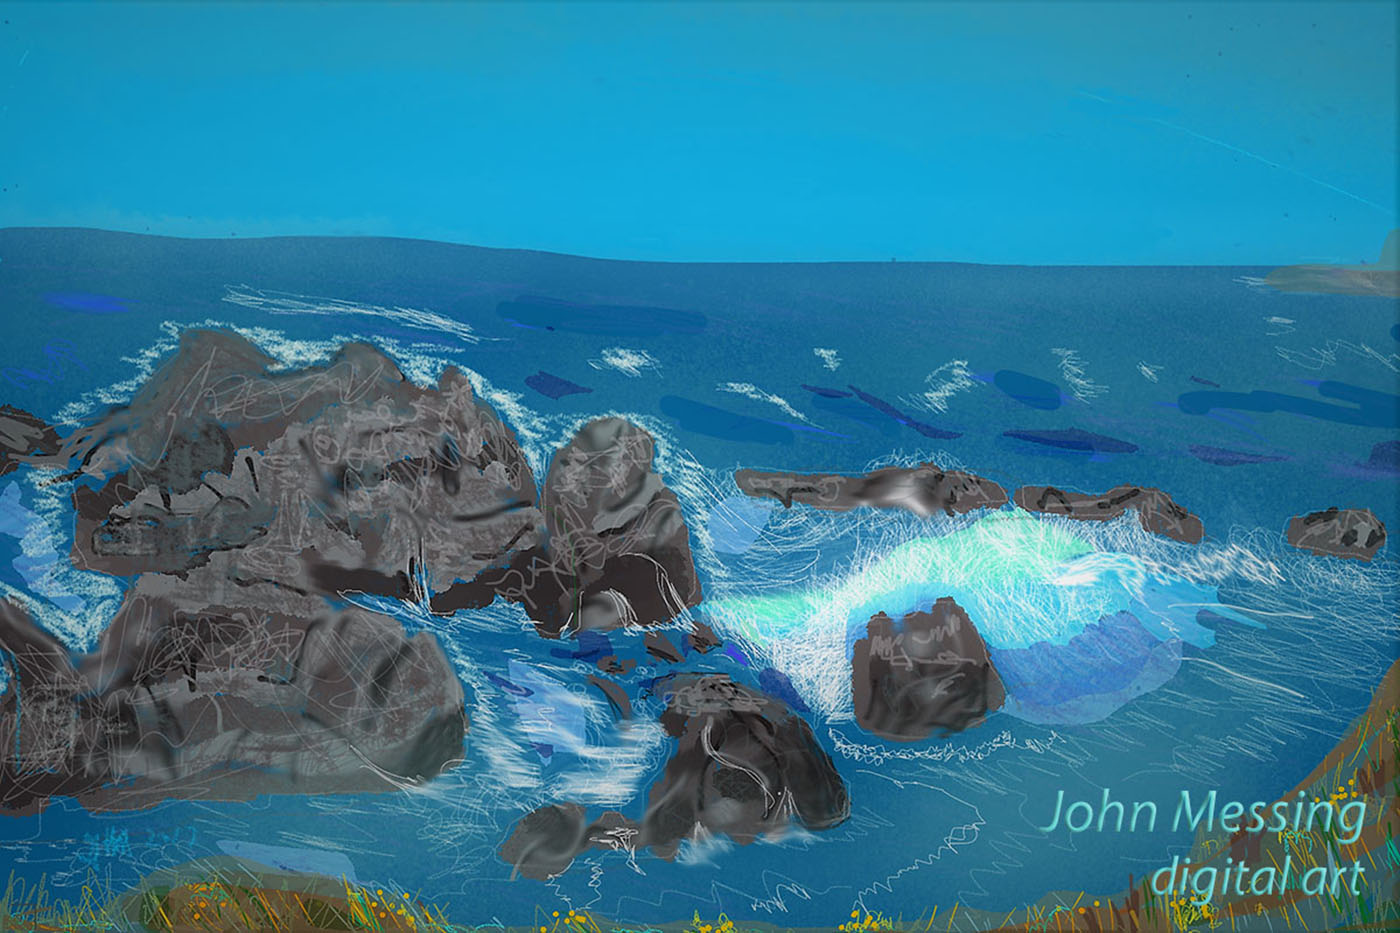 Breaking Wave painting by John Messing, registered copyright